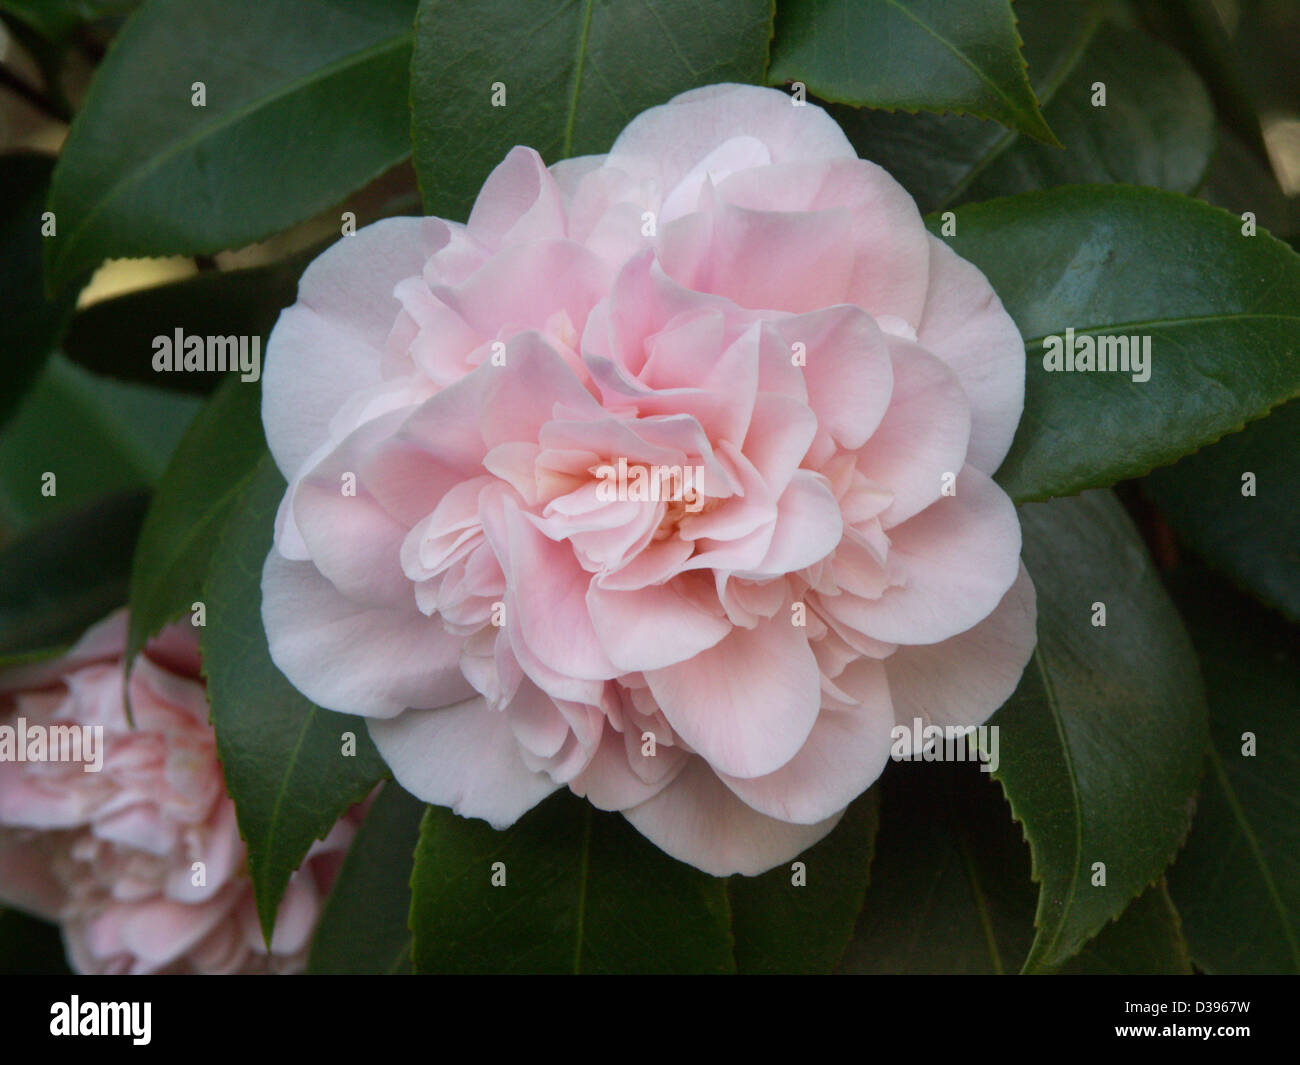 Beautiful double pale pink flower of Camellia japonica 'Tomorrow's Dawn' against background of dark green foliage Stock Photo